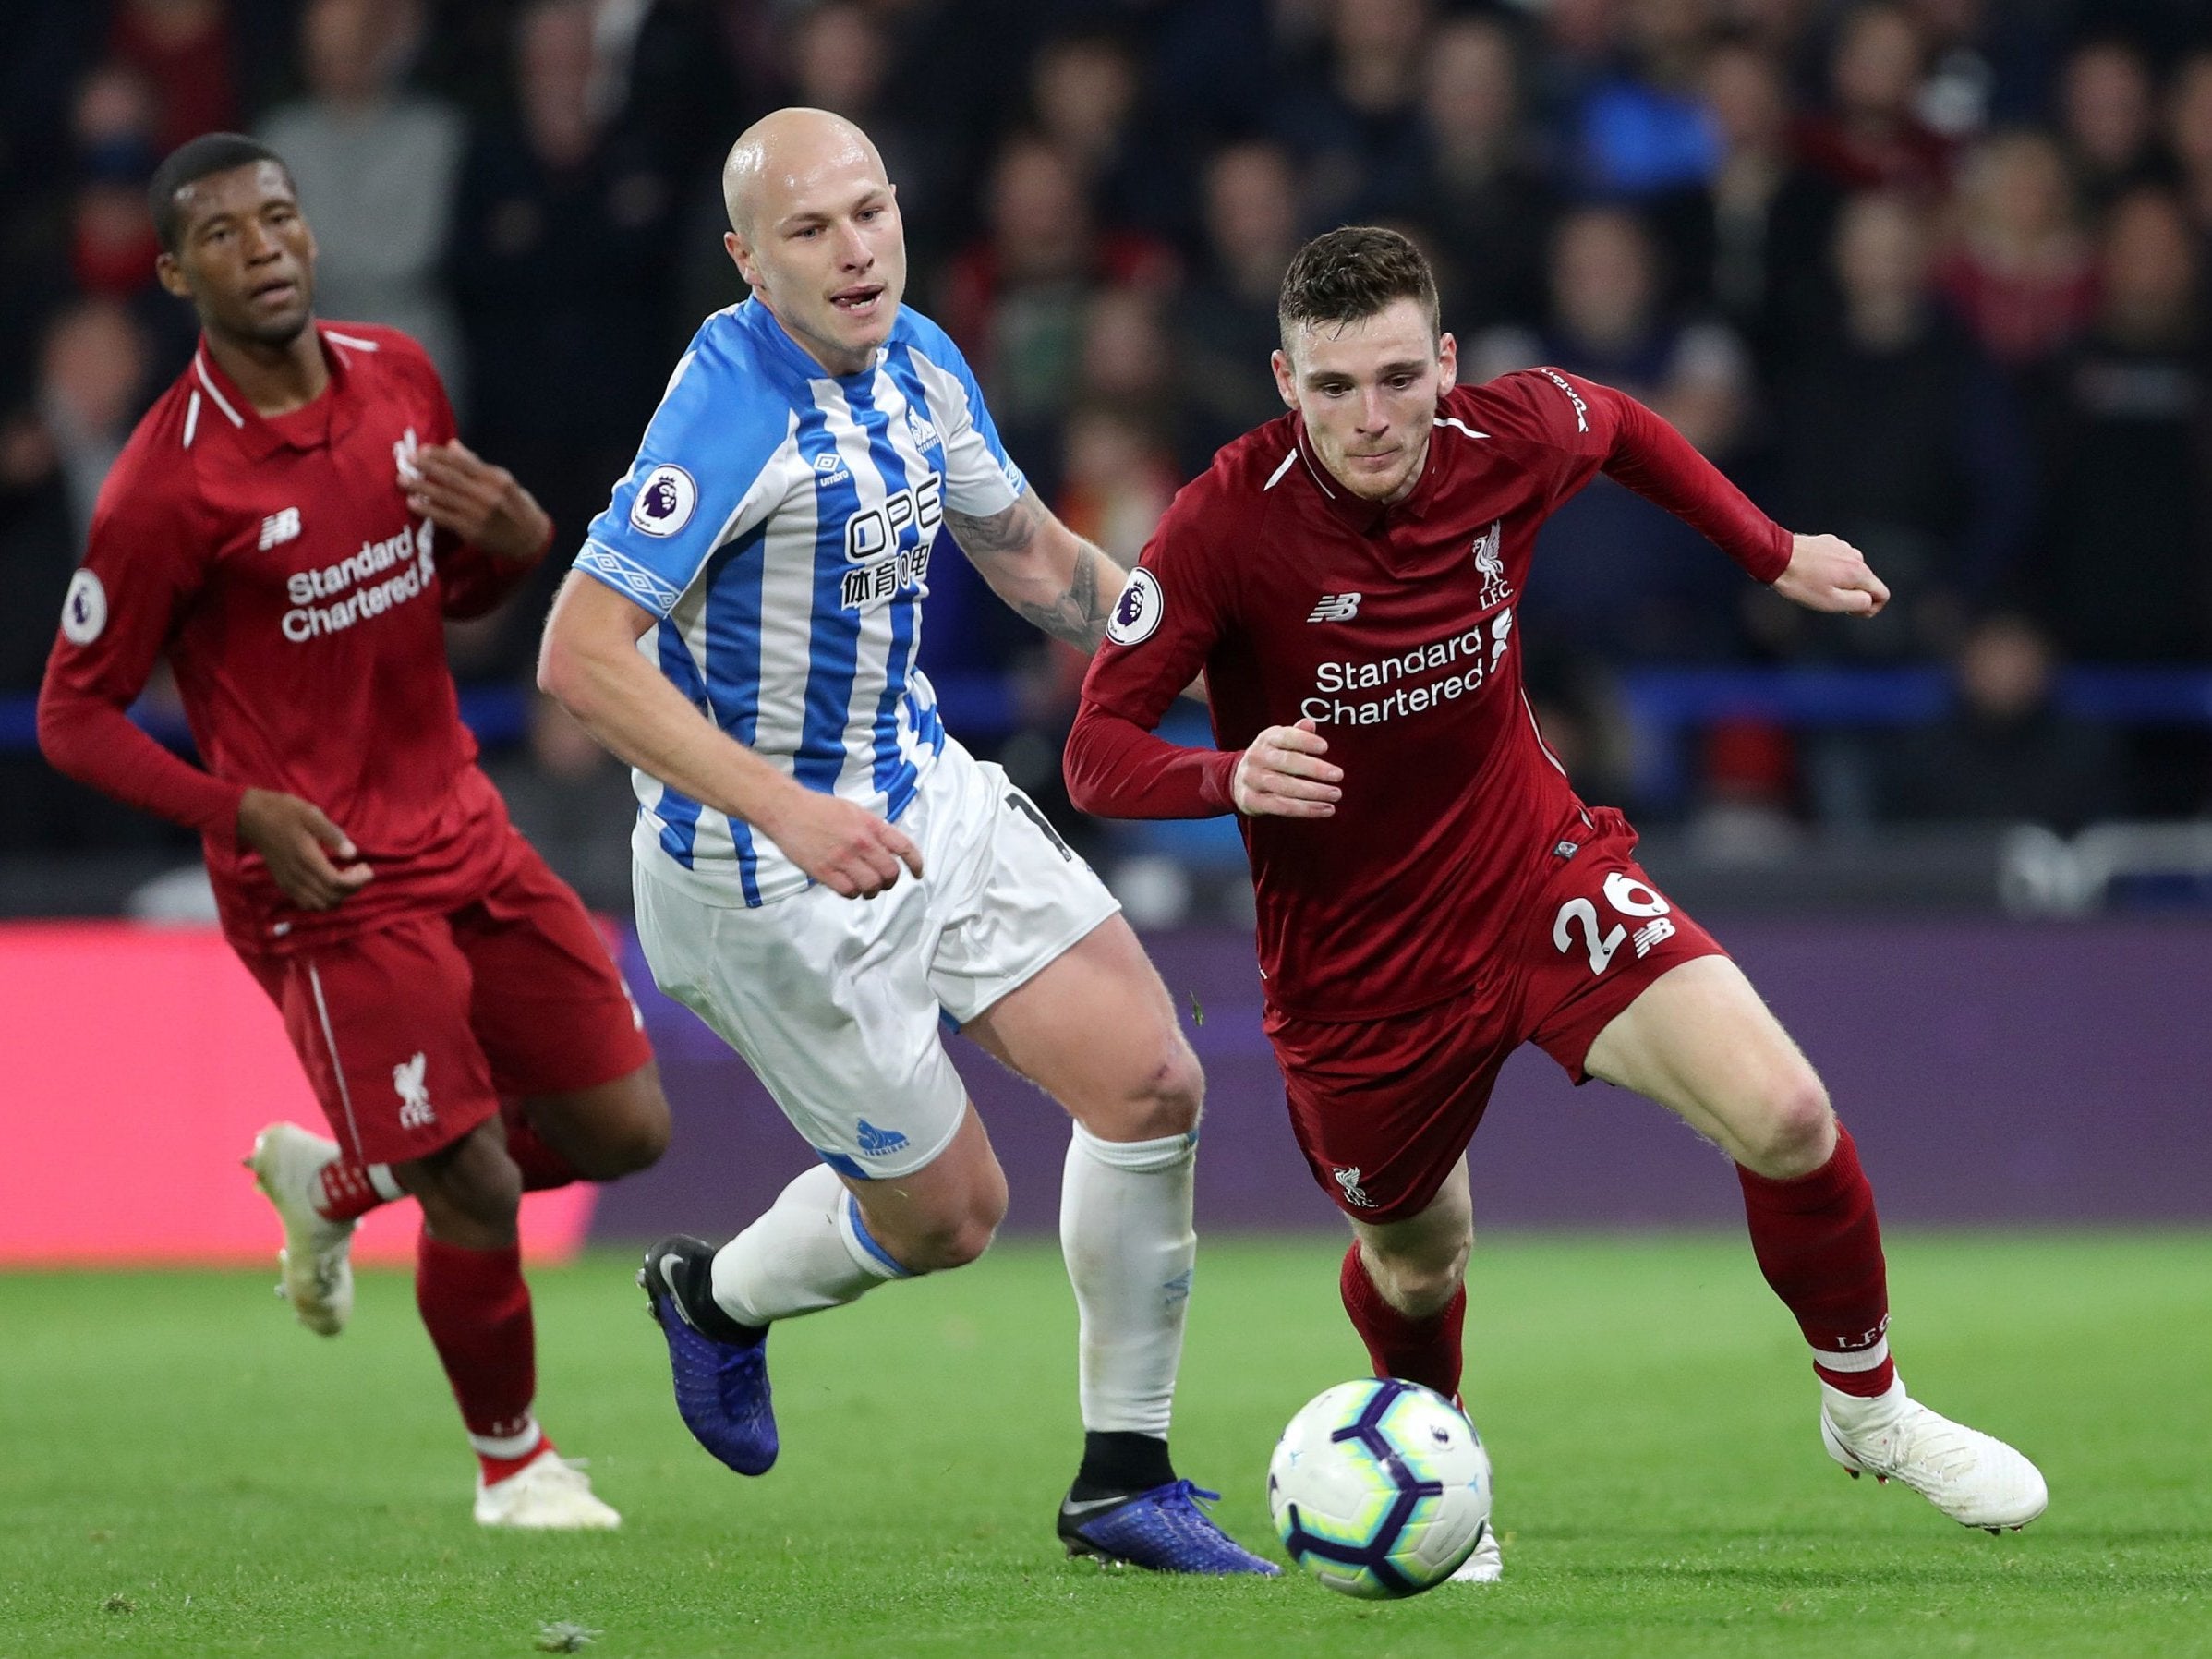 Liverpool squeezed past Huddersfield